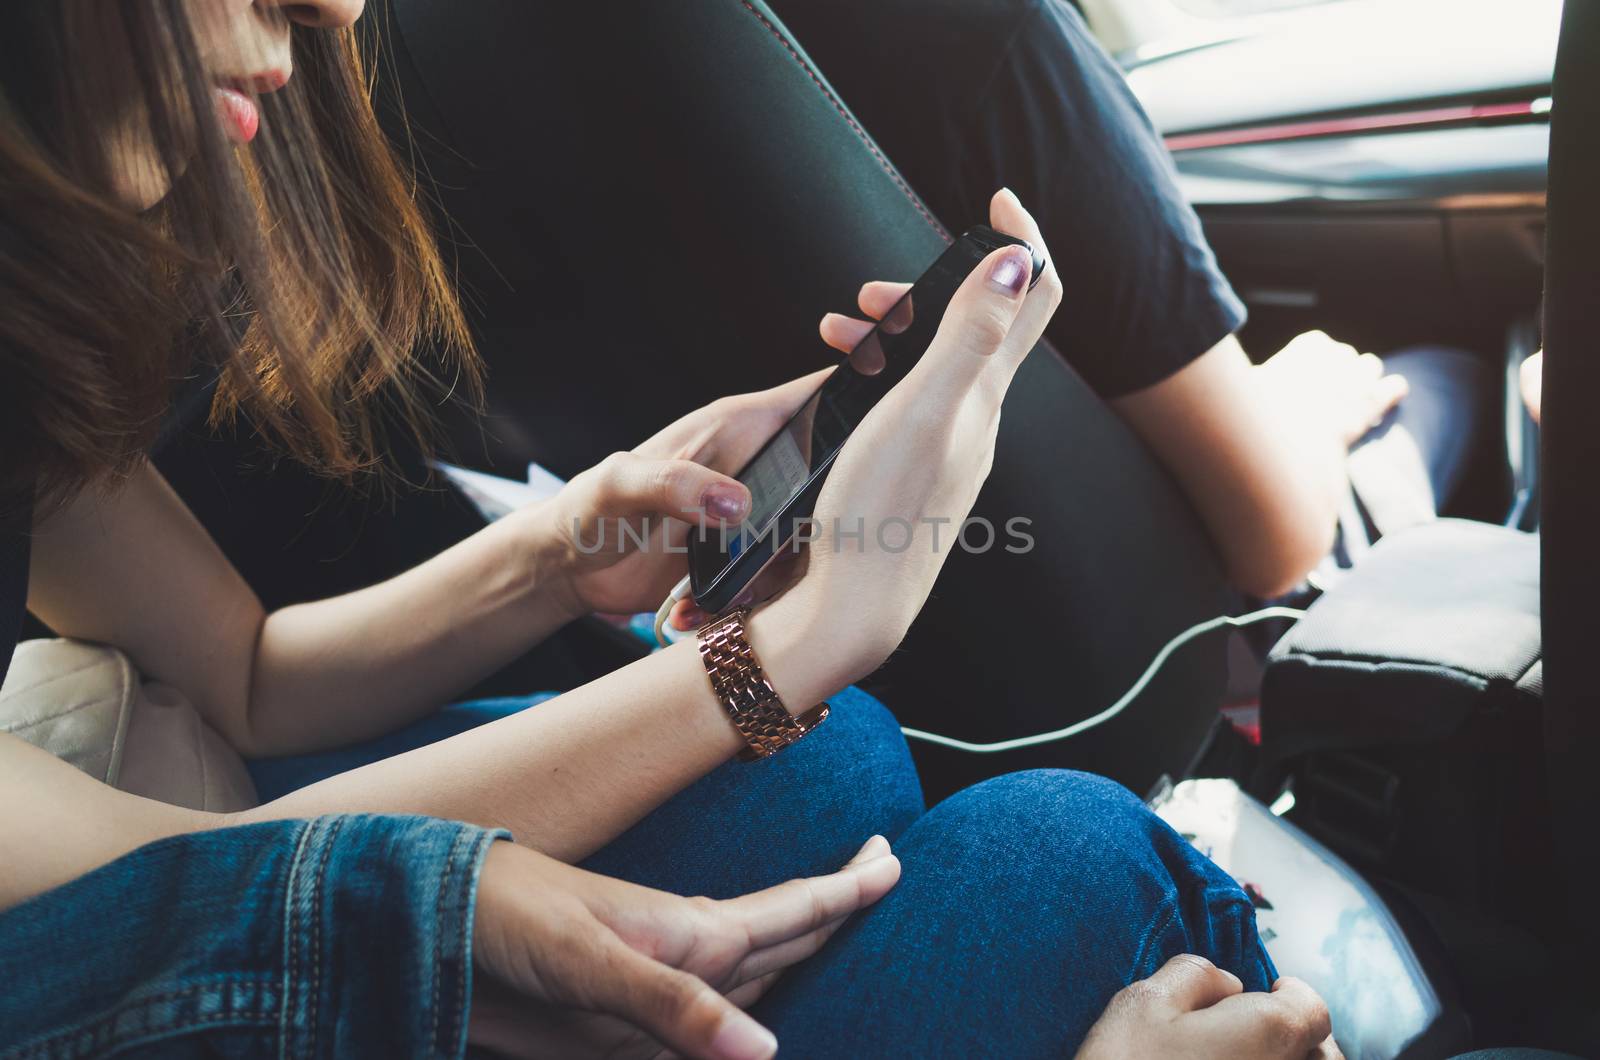 Women using phone in the car by nopparats